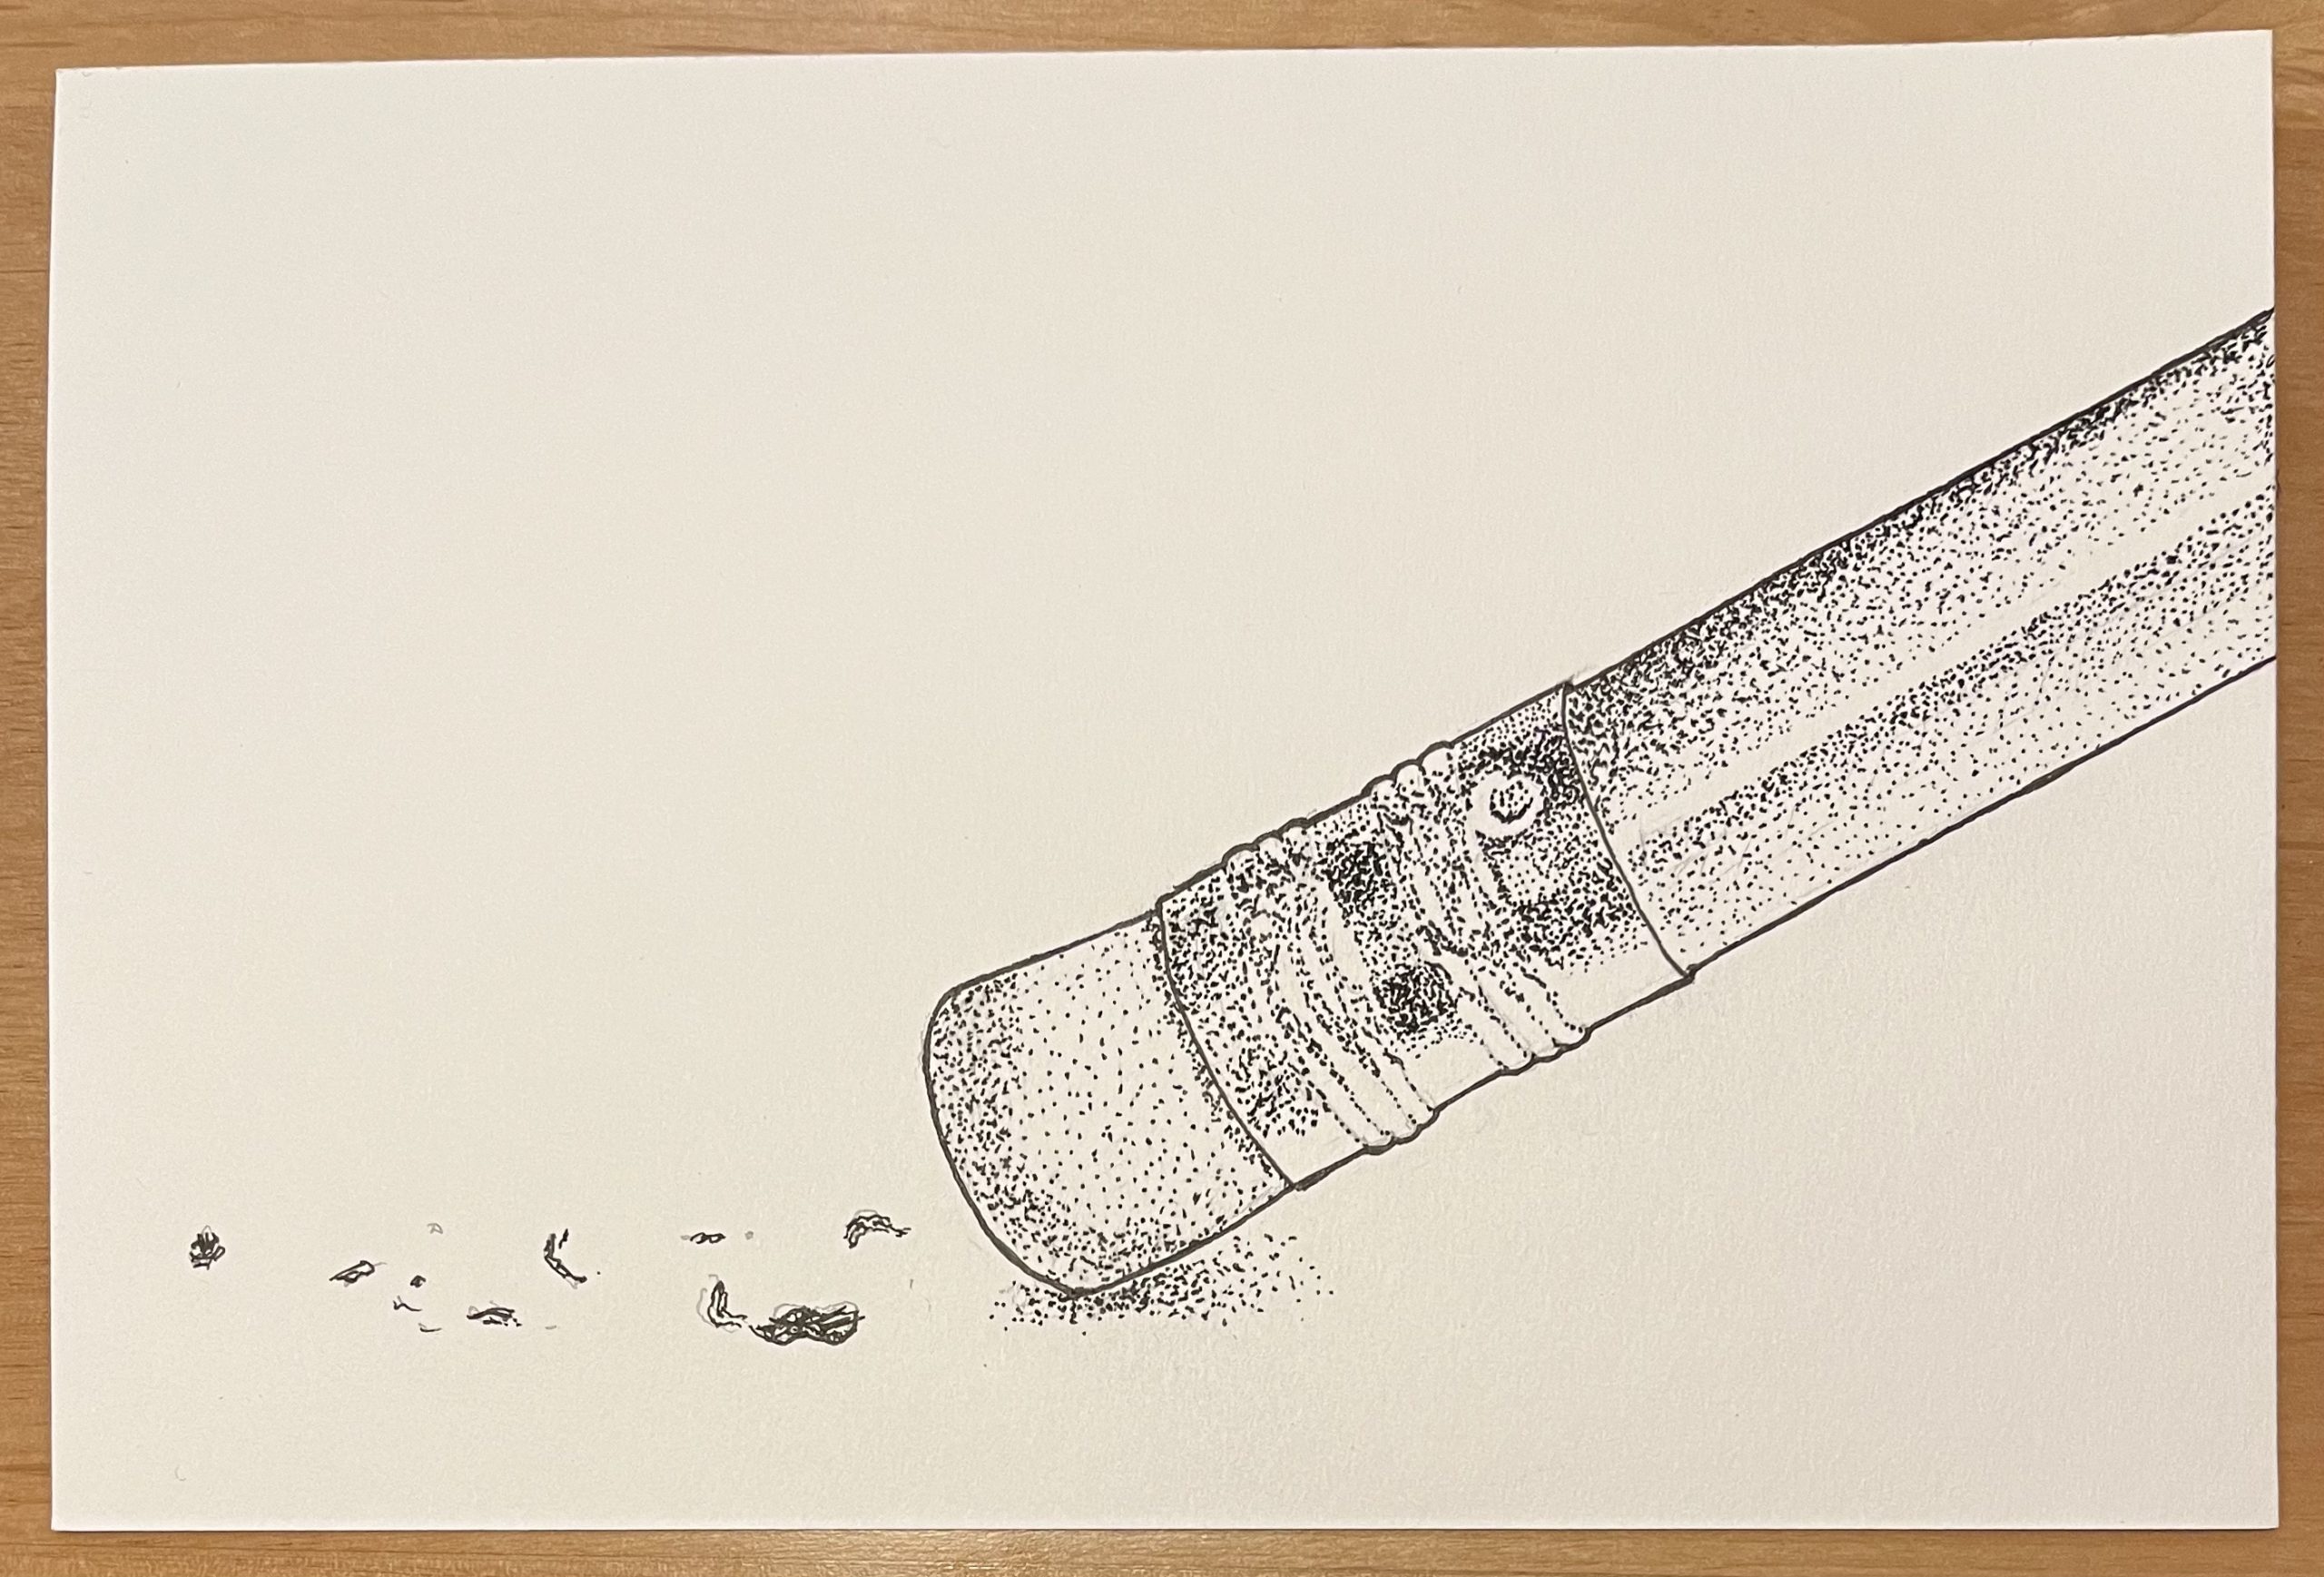 A pen and ink drawing of a pencil erasing, leaving a trail of rubber bits.